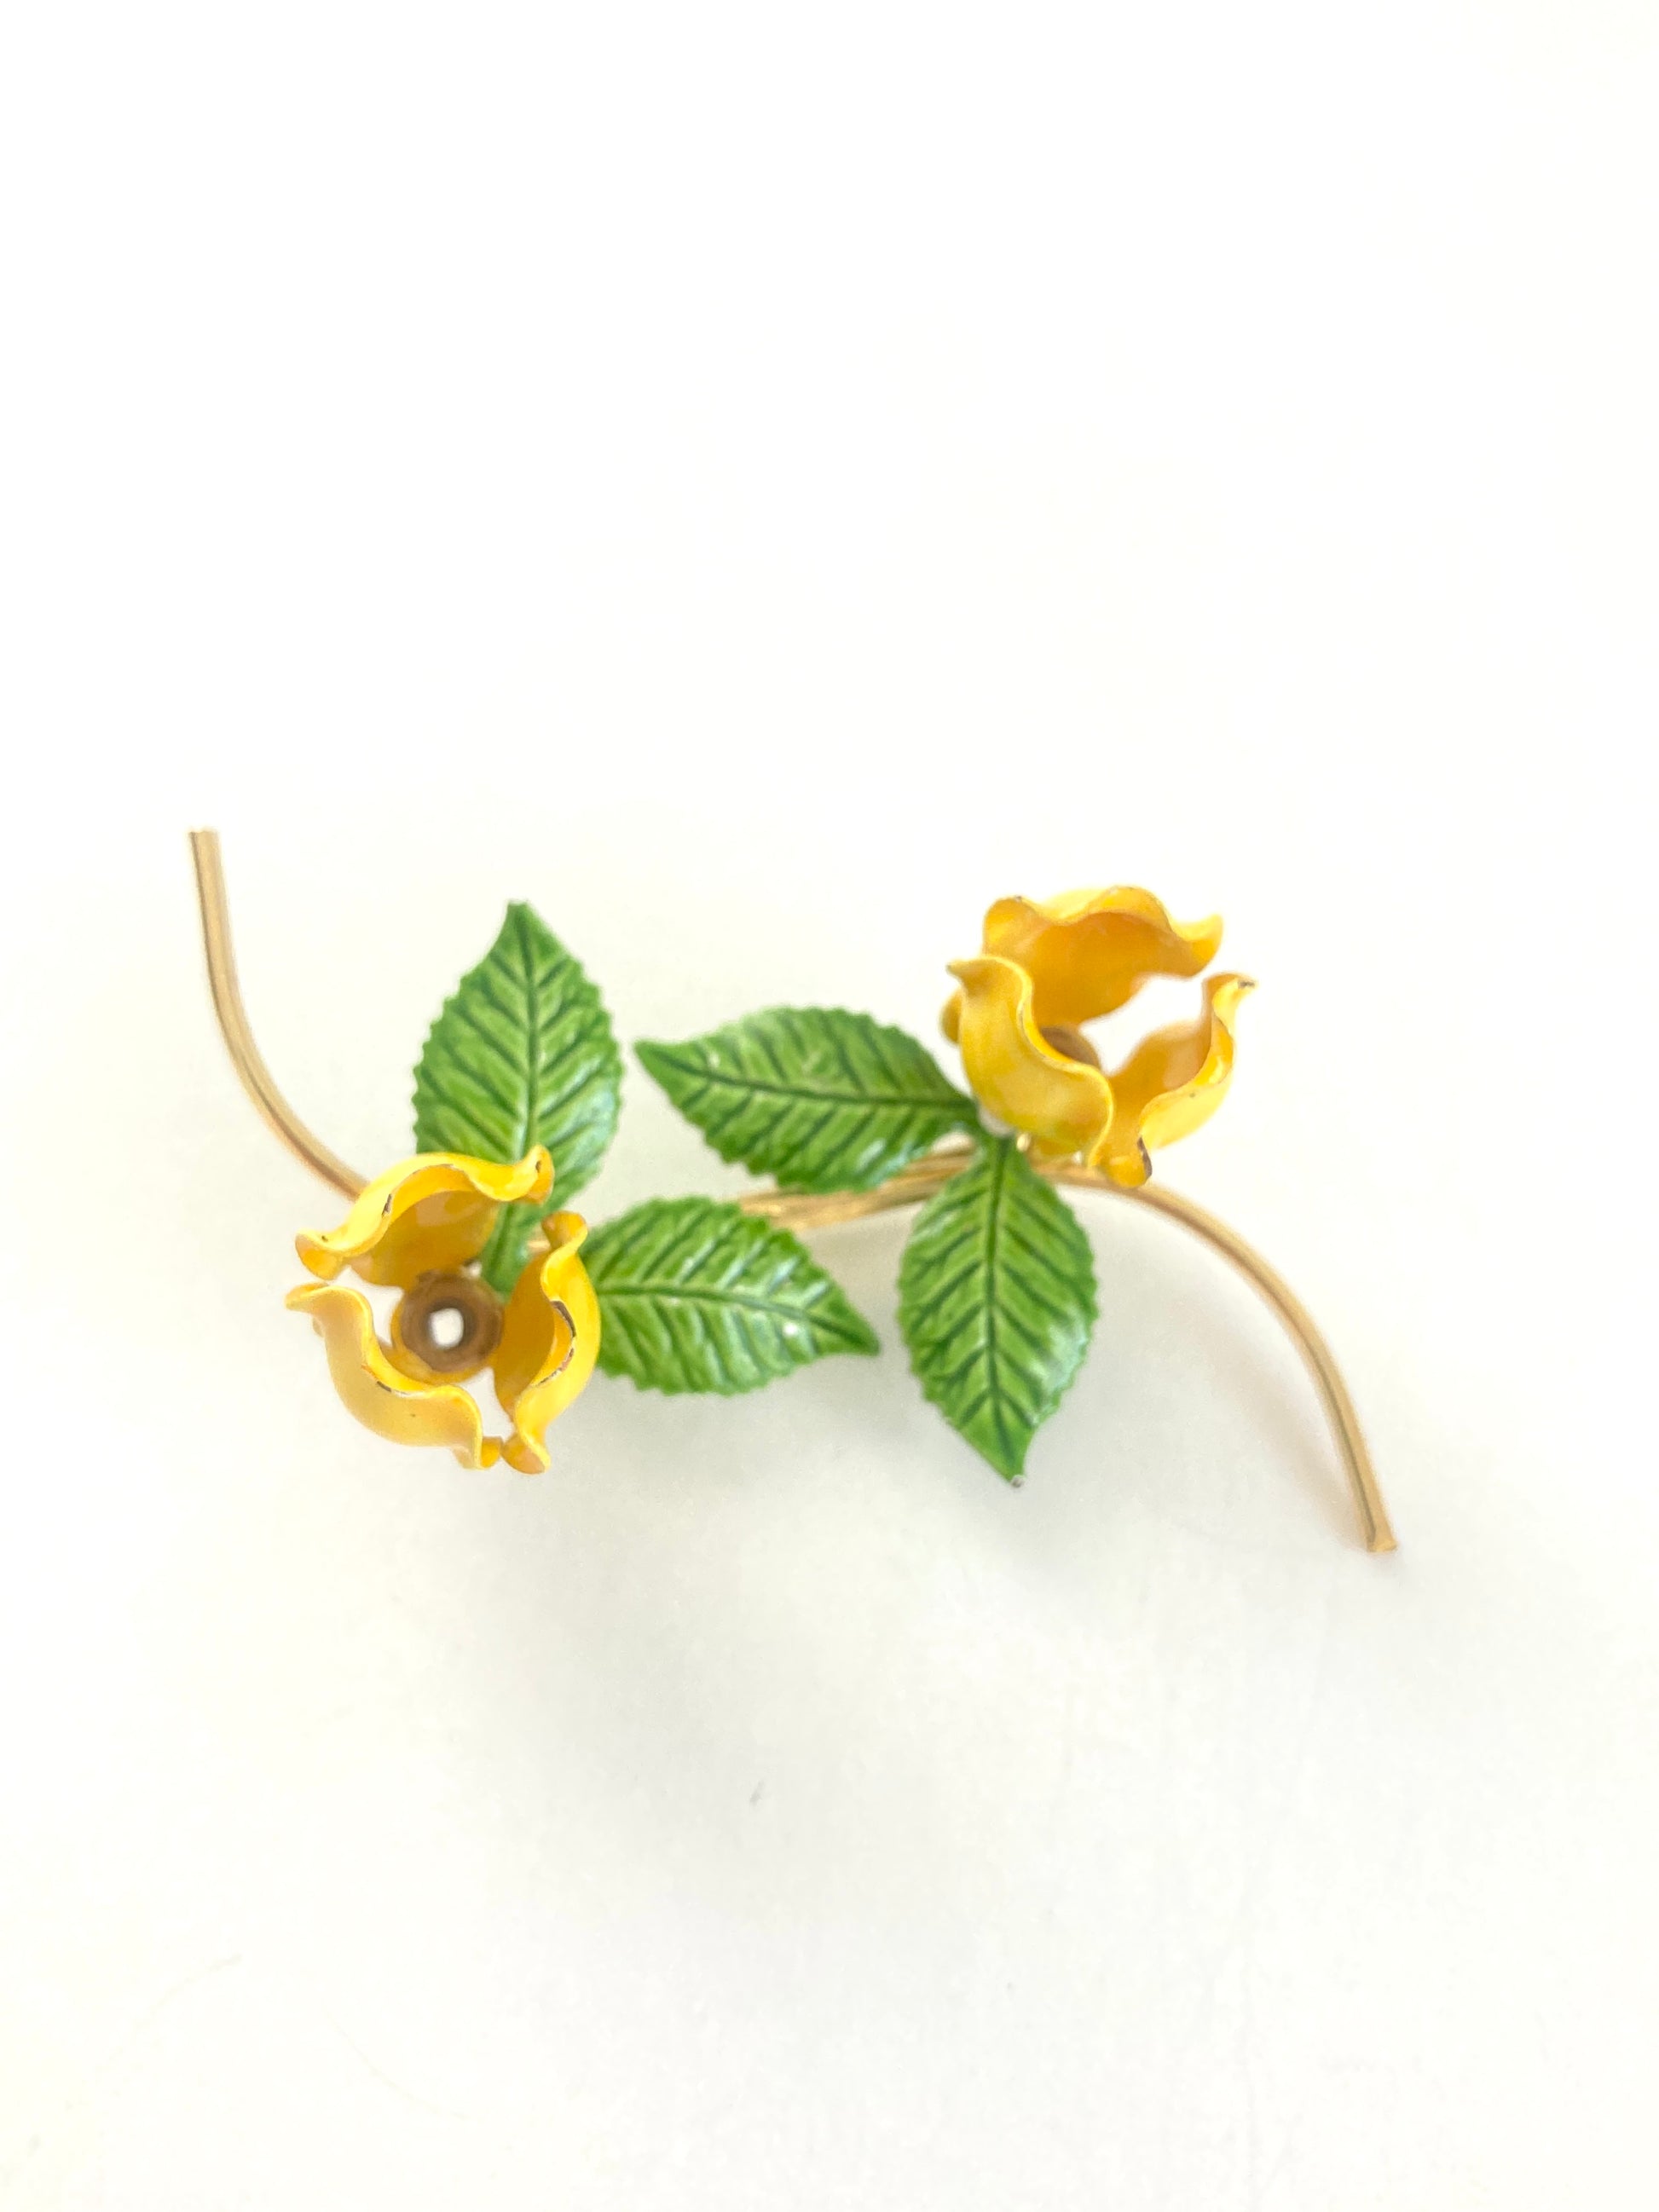 Vintage Enamel Double Flower Brooch Yellow and Green